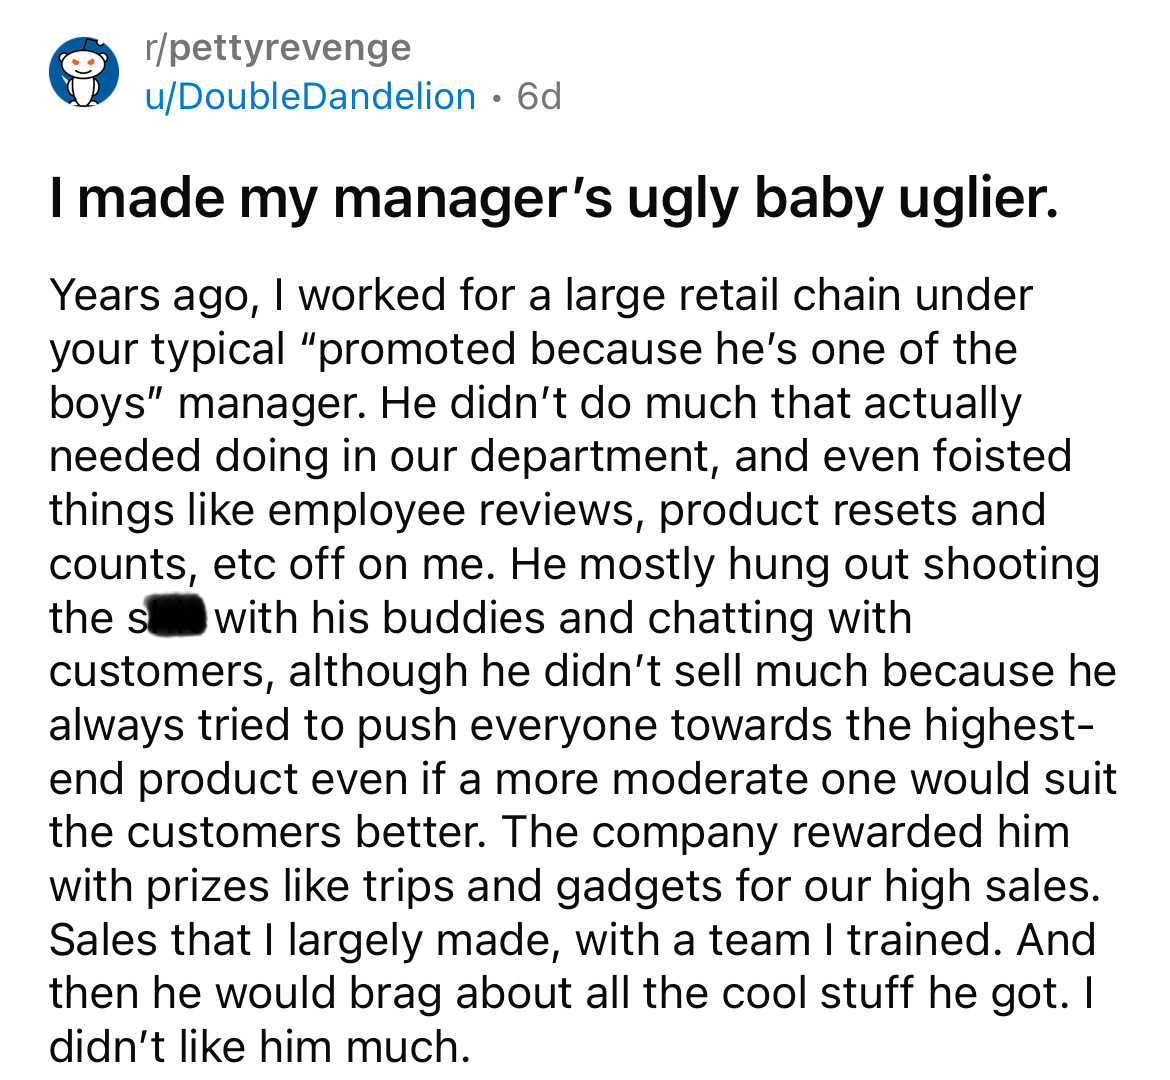 Revenge of the Week: Fed Up Employee Gets Back at Manager By Making Their New Baby Uglier